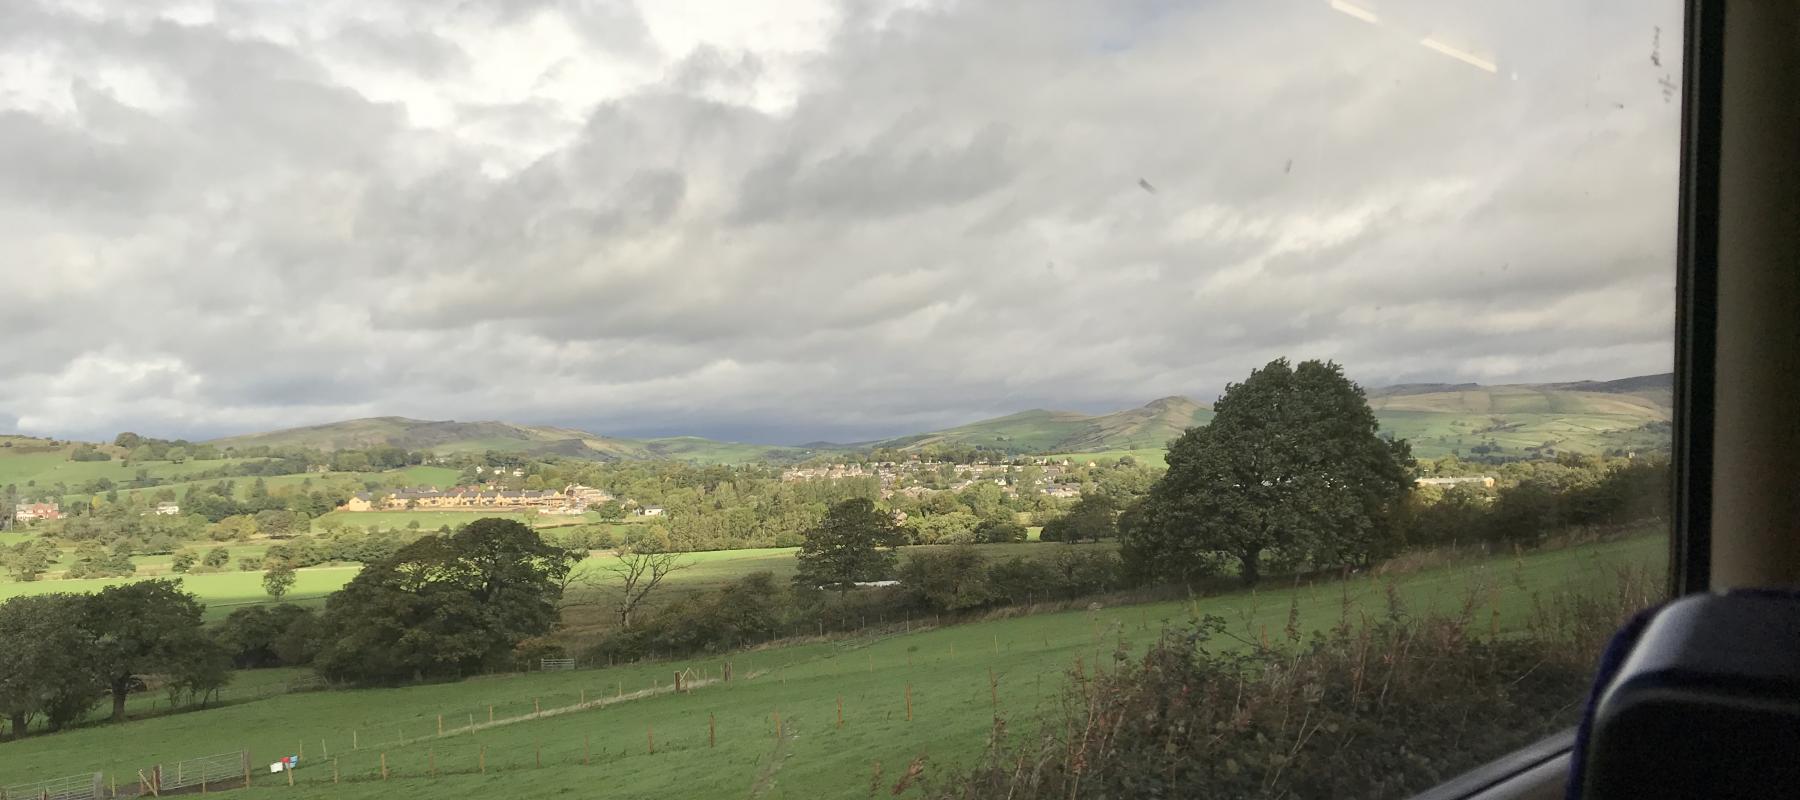 A view from the train window along the Buxton Line